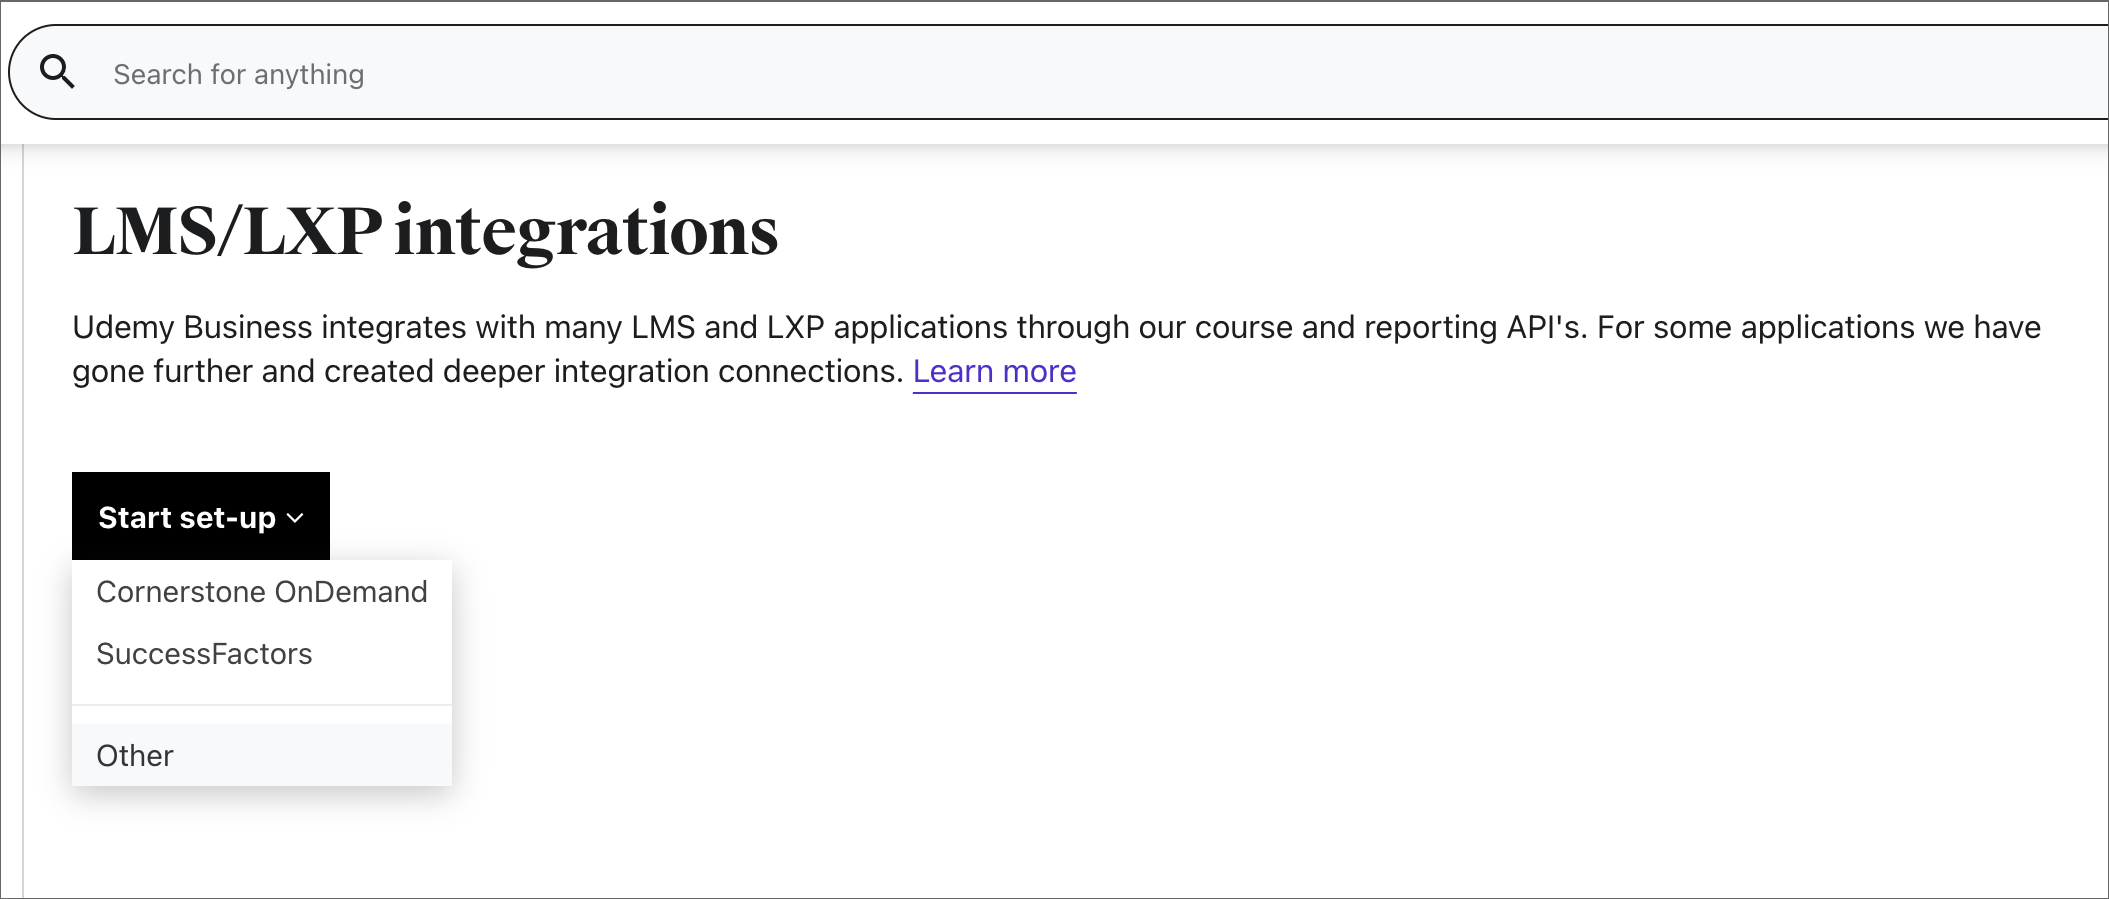 Image of the LMS/LXP Integrations settings page.